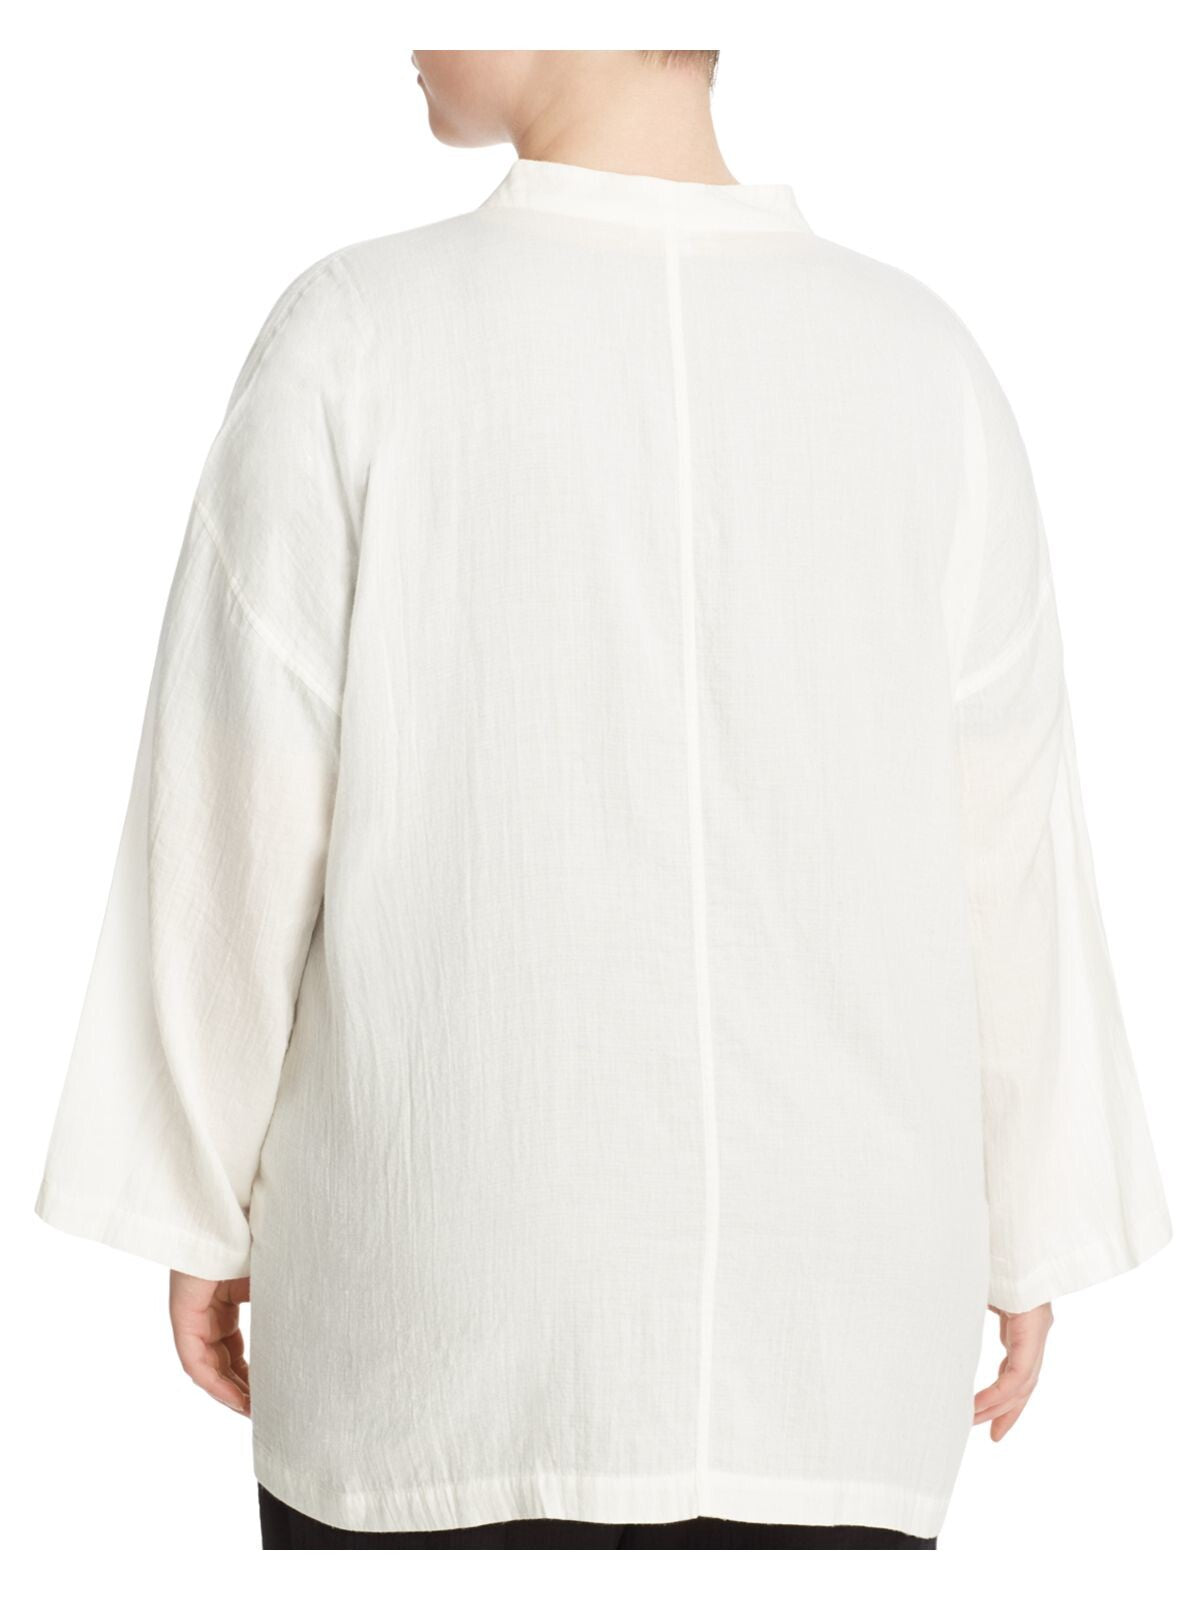 EILEEN FISHER Womens White Pocketed Long Sleeve Open Cardigan Sweater Plus 2X